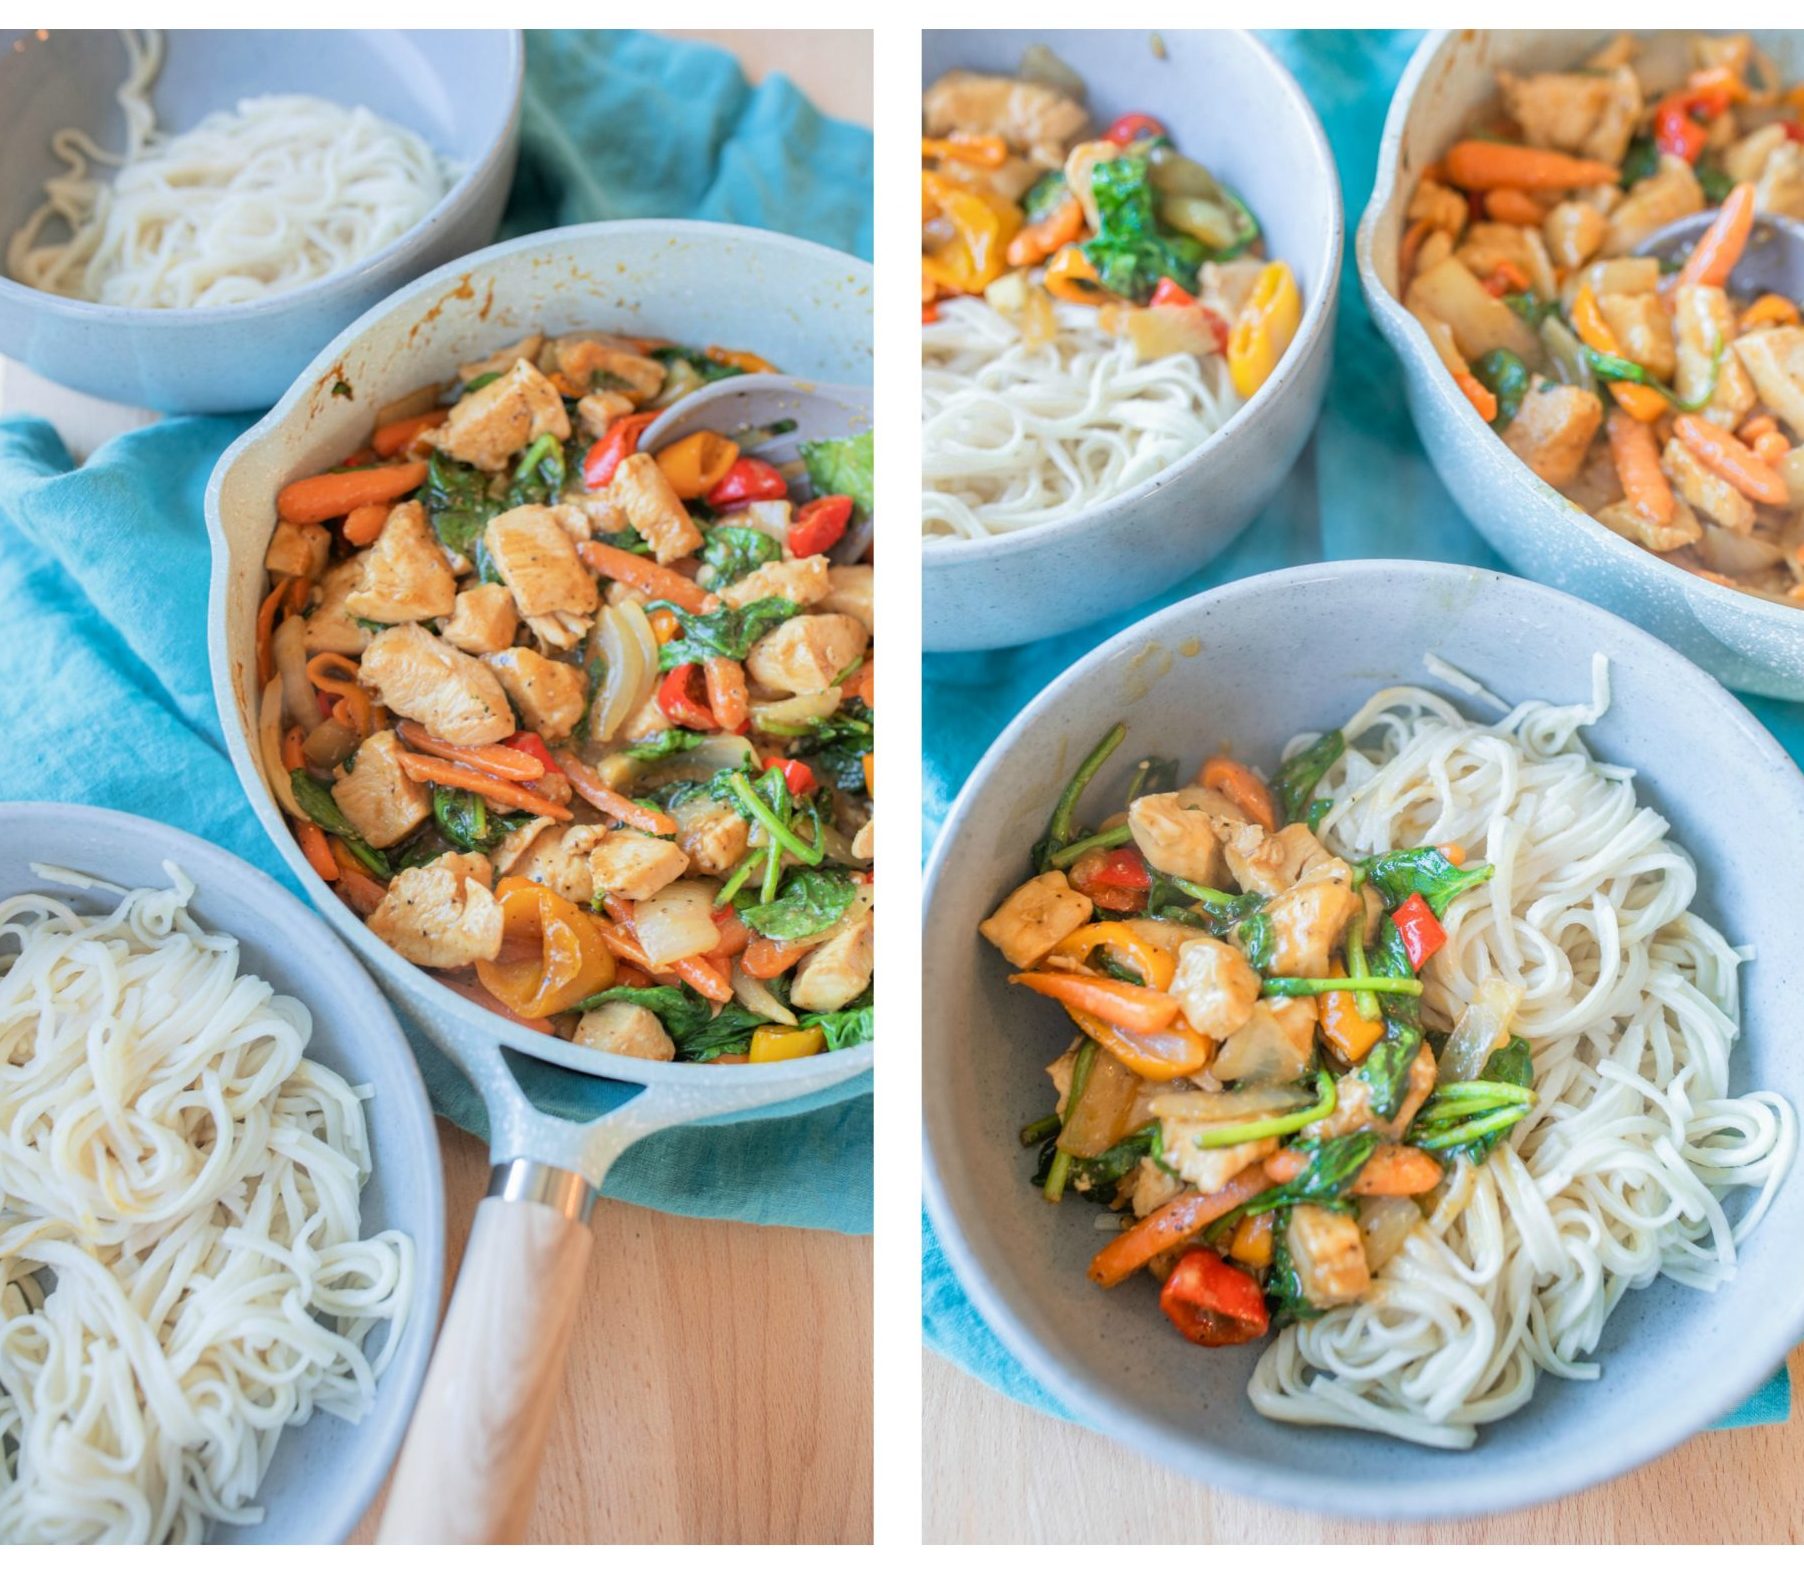 Chicken and vegetable stir fry, gluten free, dairy free, dinner, recipe, low carb, rice noodles, cooking food